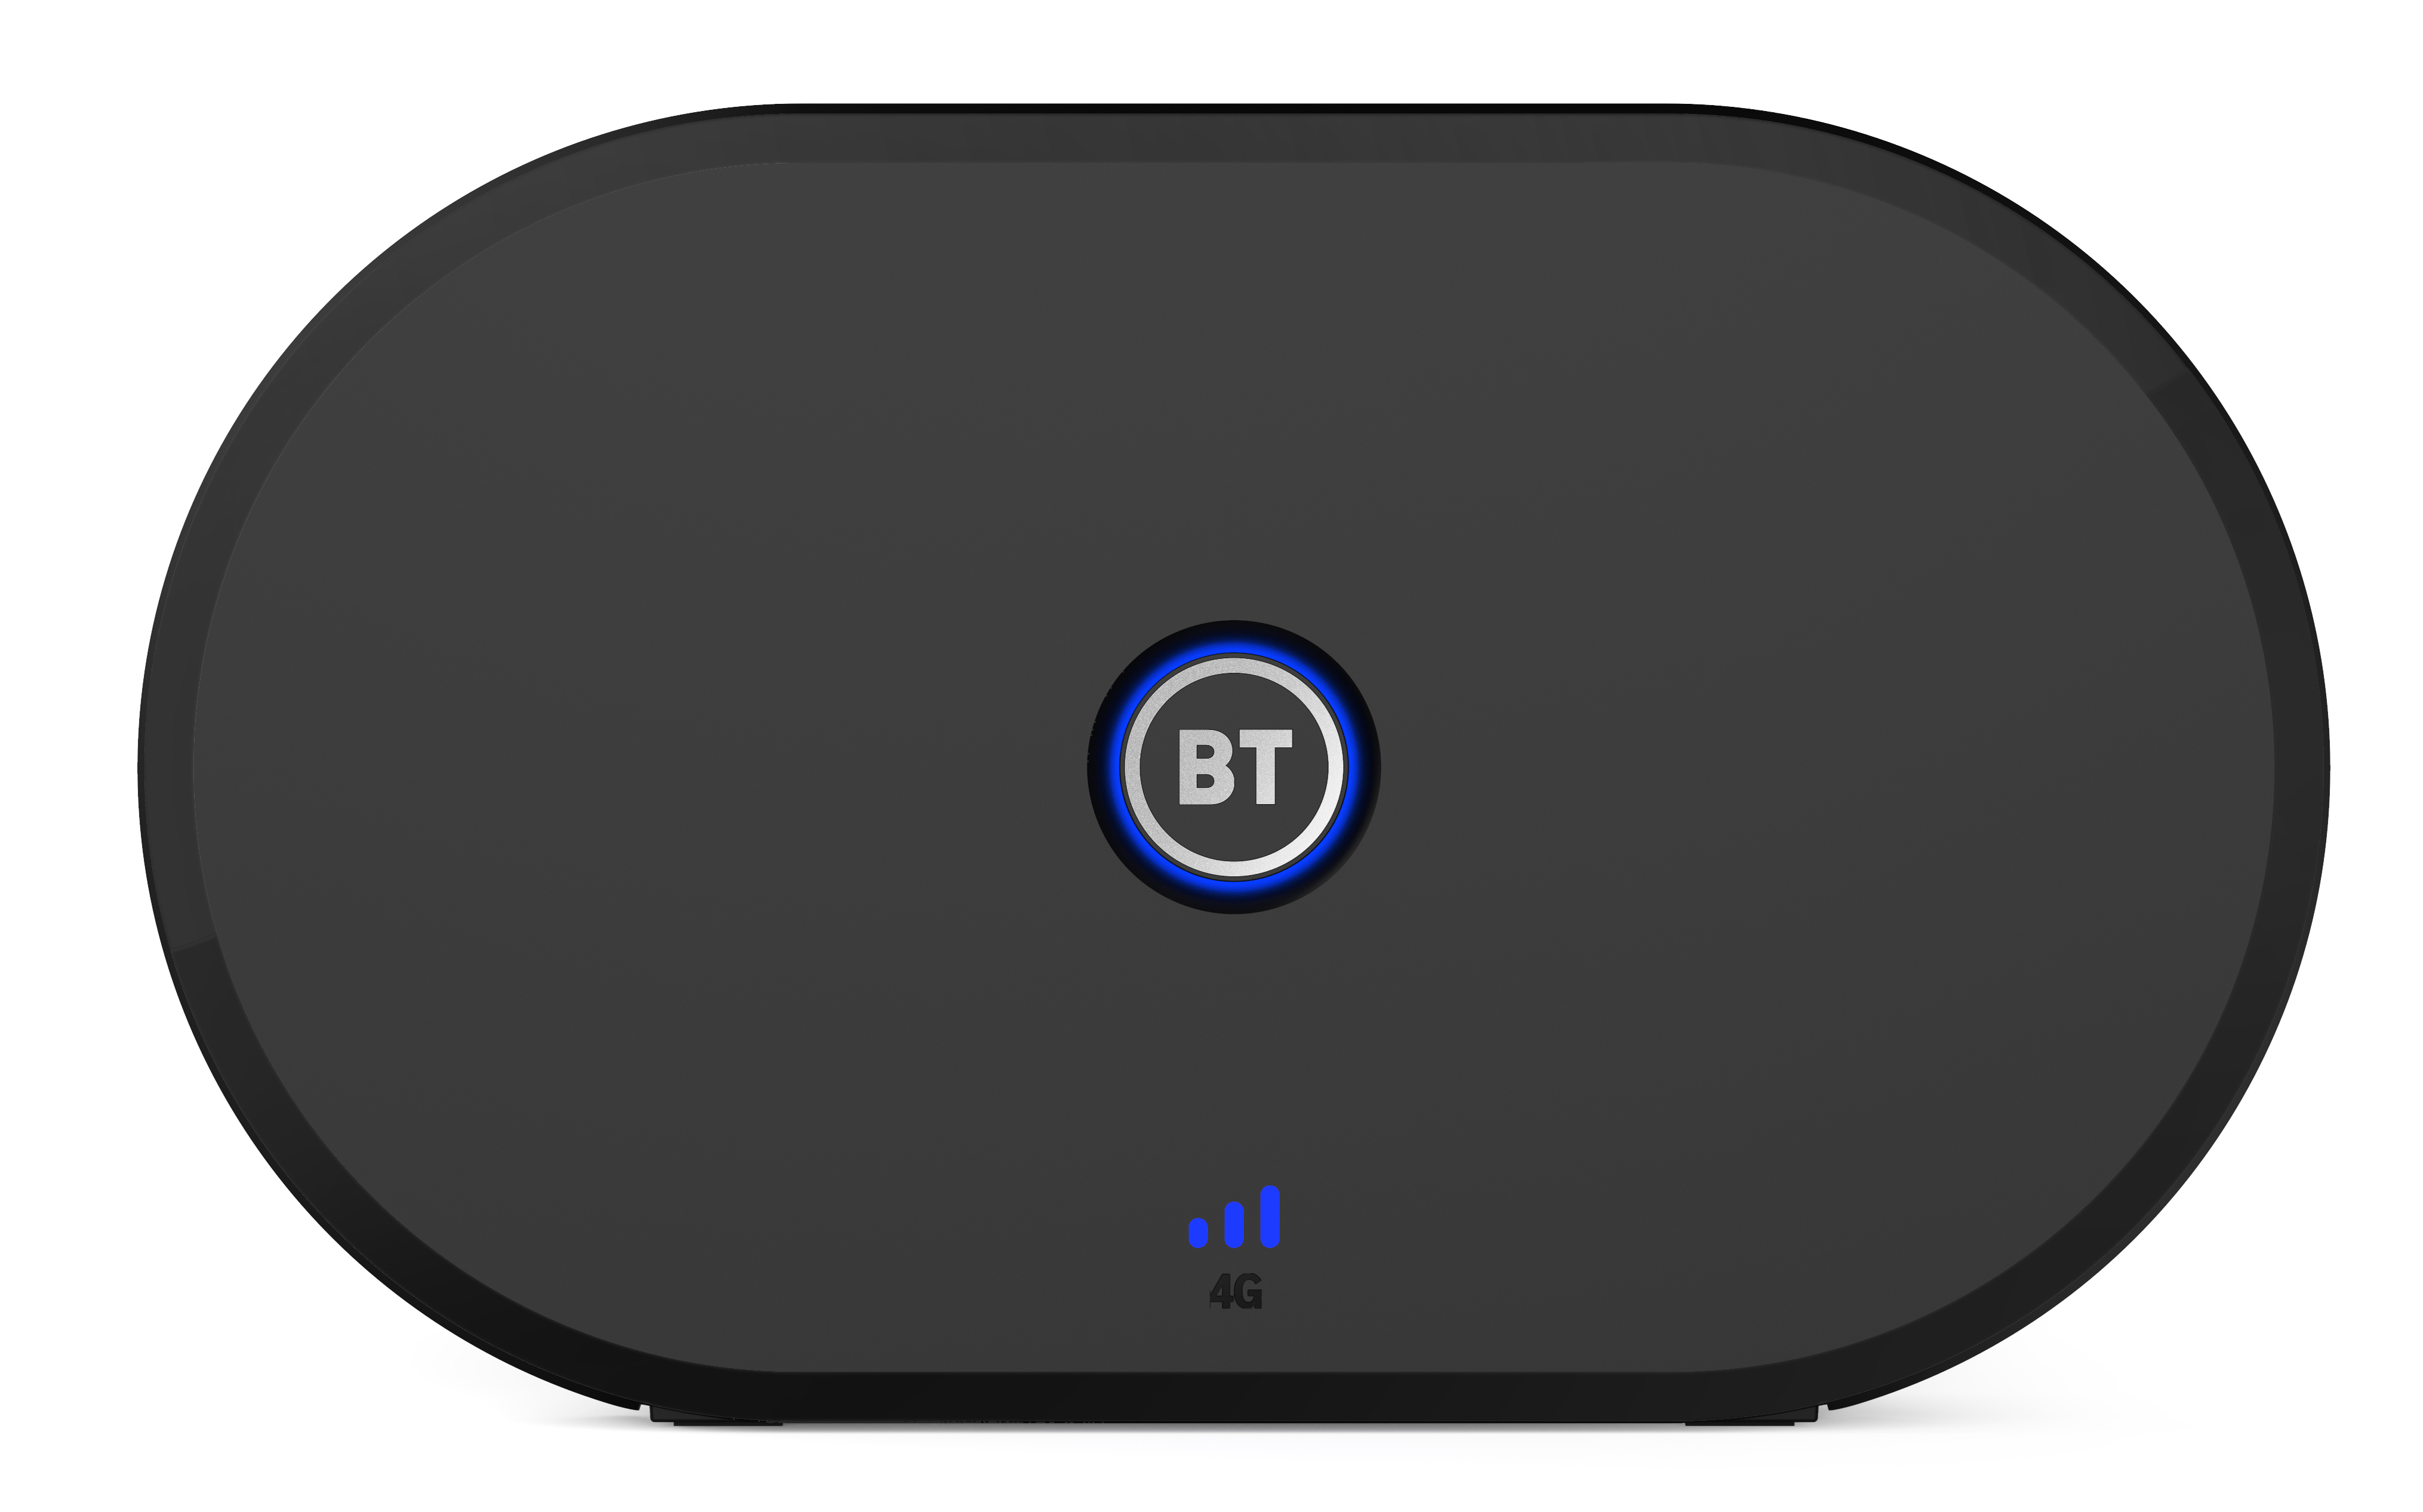 BT combines home wifi with EE network to create new ‘unbreakable’ home